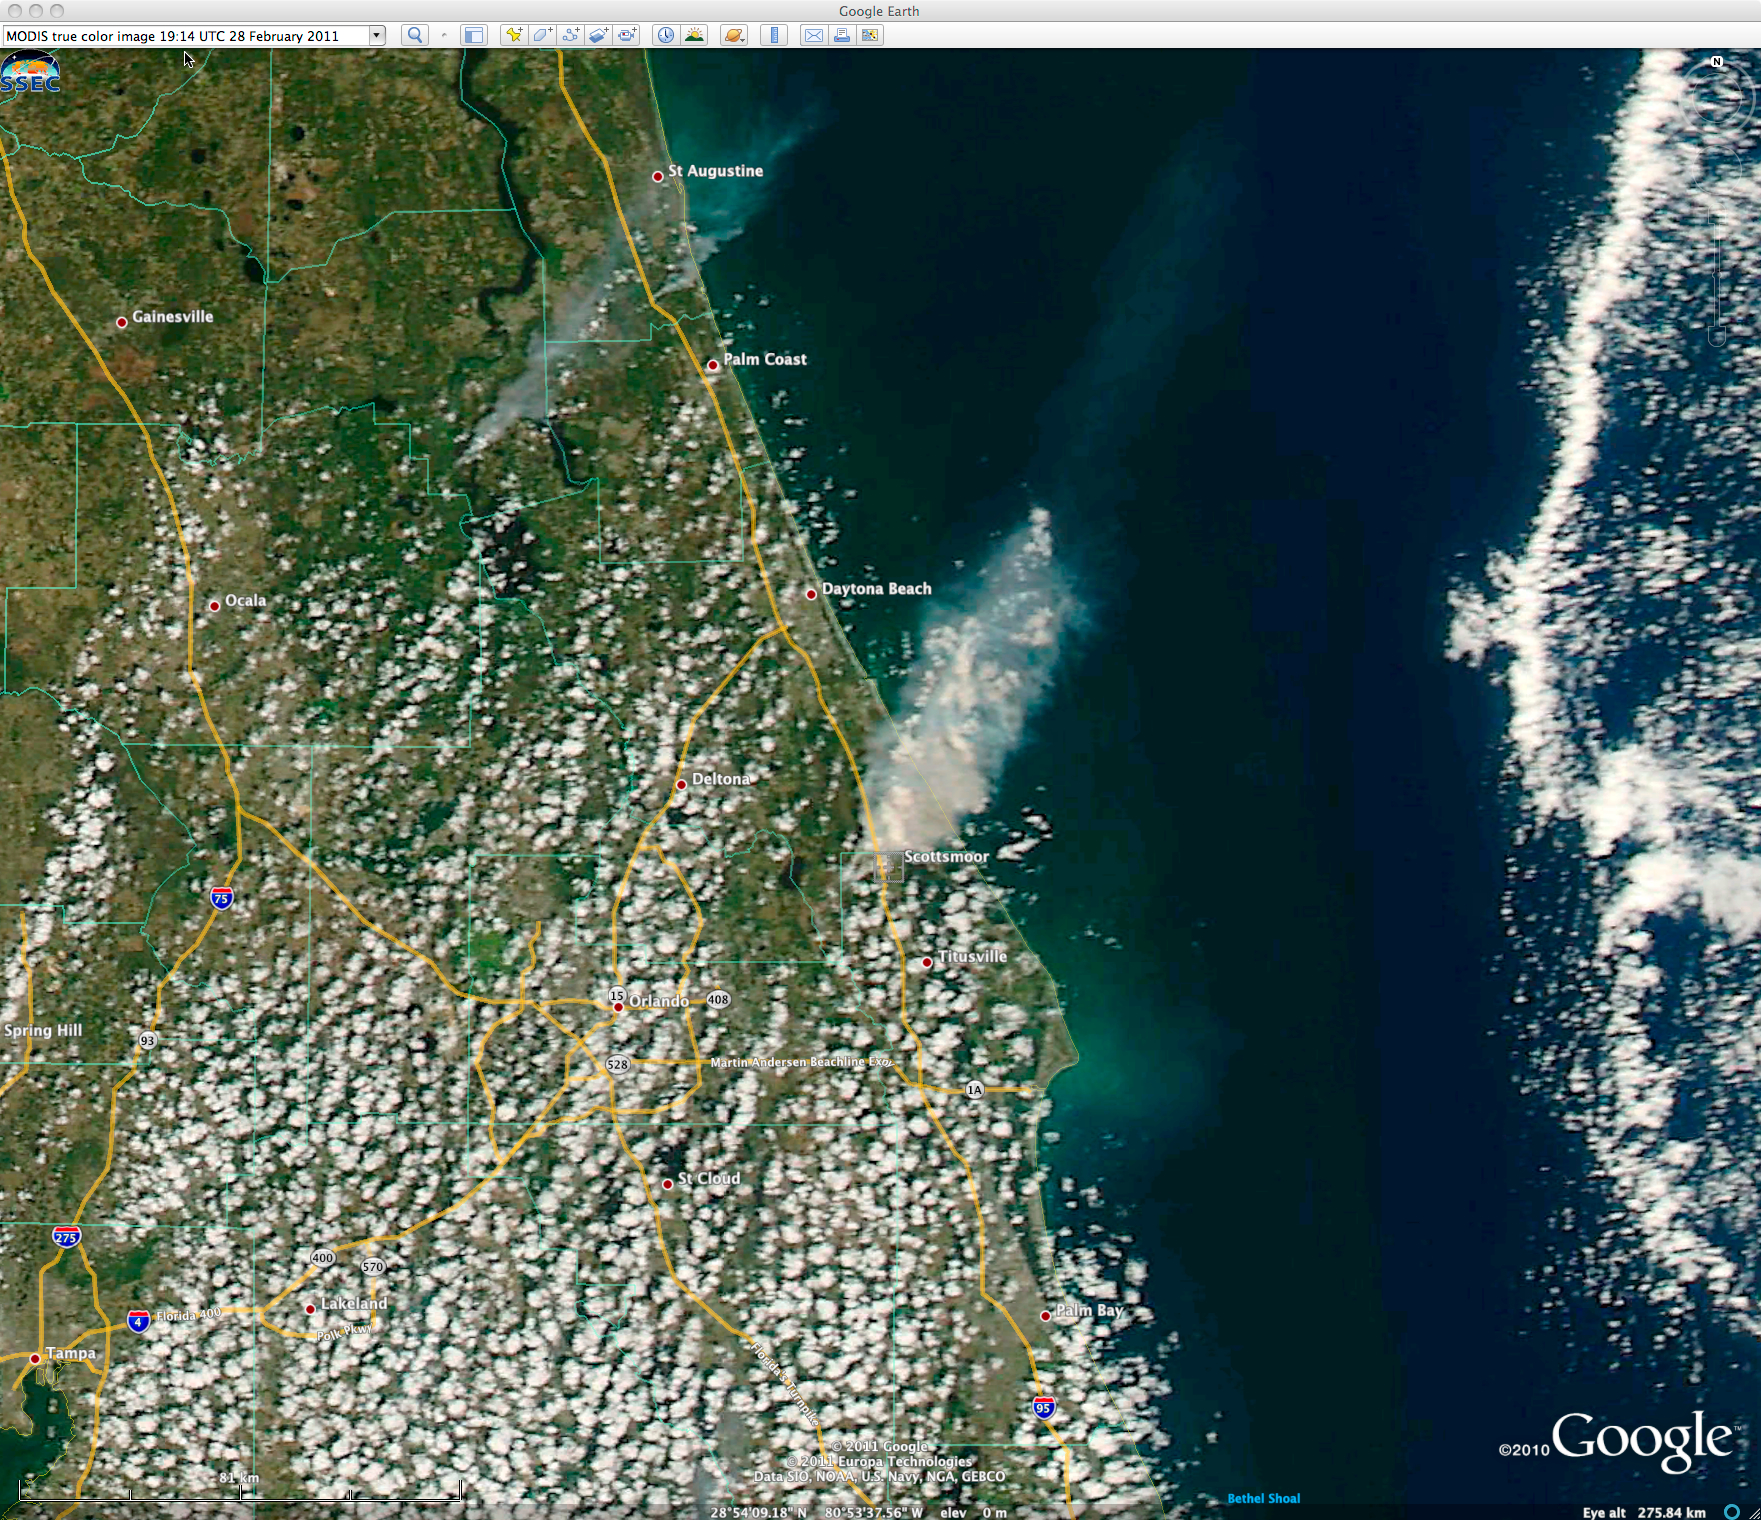 MODIS true color Red/Green/Blue (RGB) image (viewed using Google Earth)